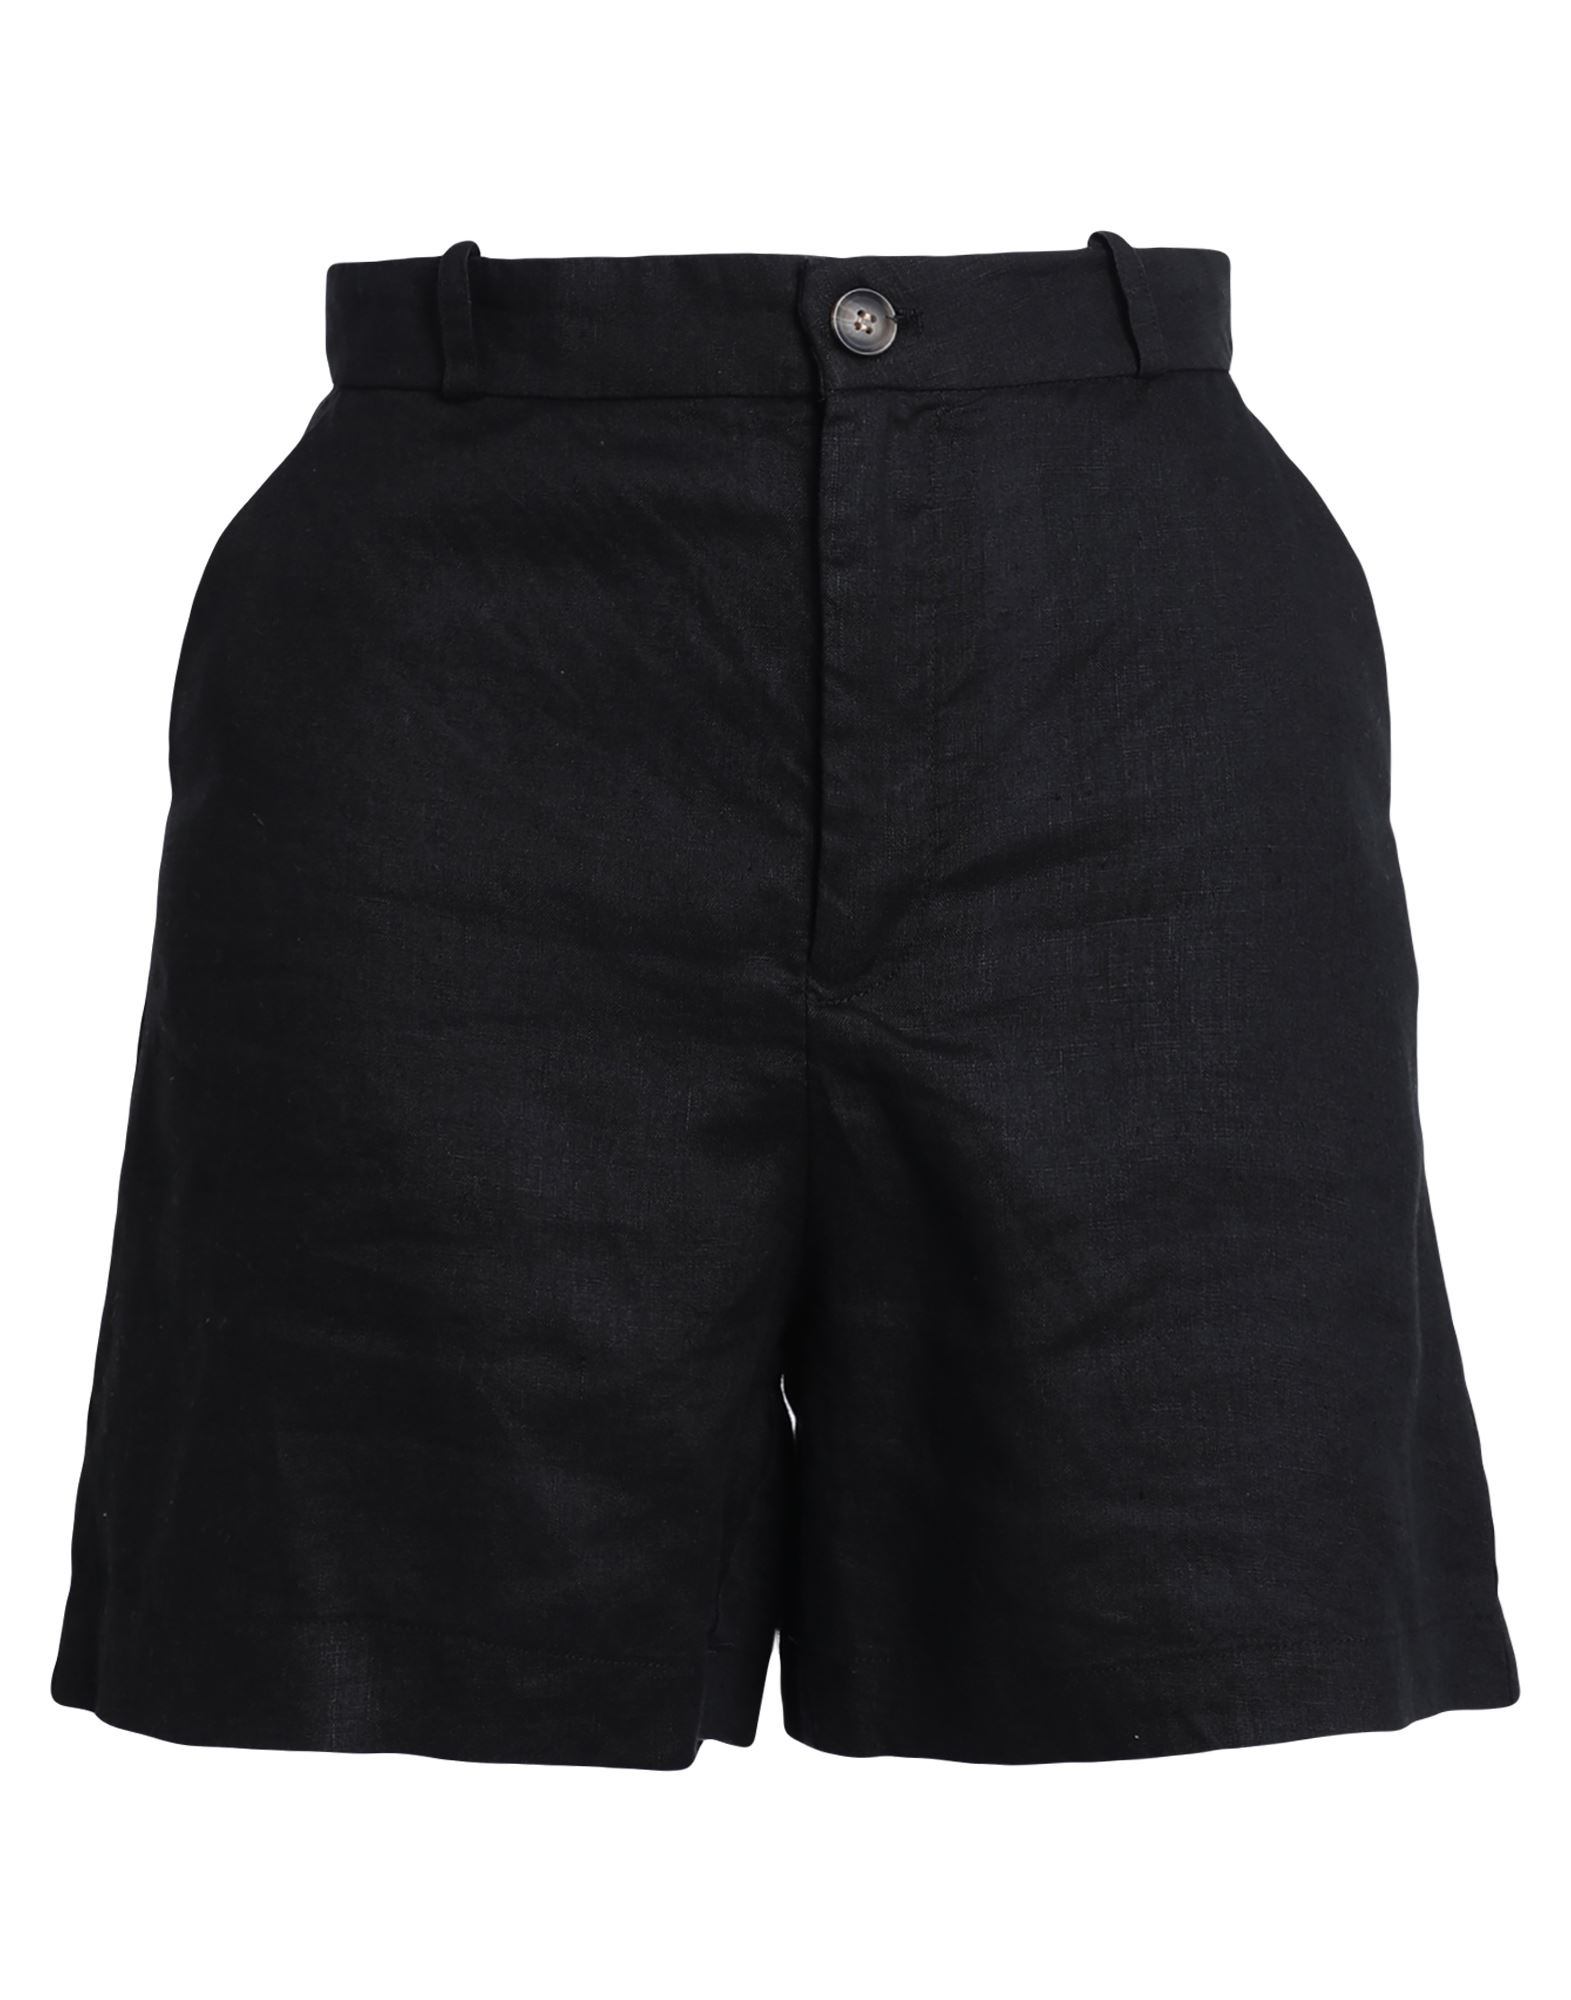 OTHER STORIES & OTHER STORIES - WOMAN SHORTS & BERMUDA SHORTS BLACK SIZE 8 LINEN